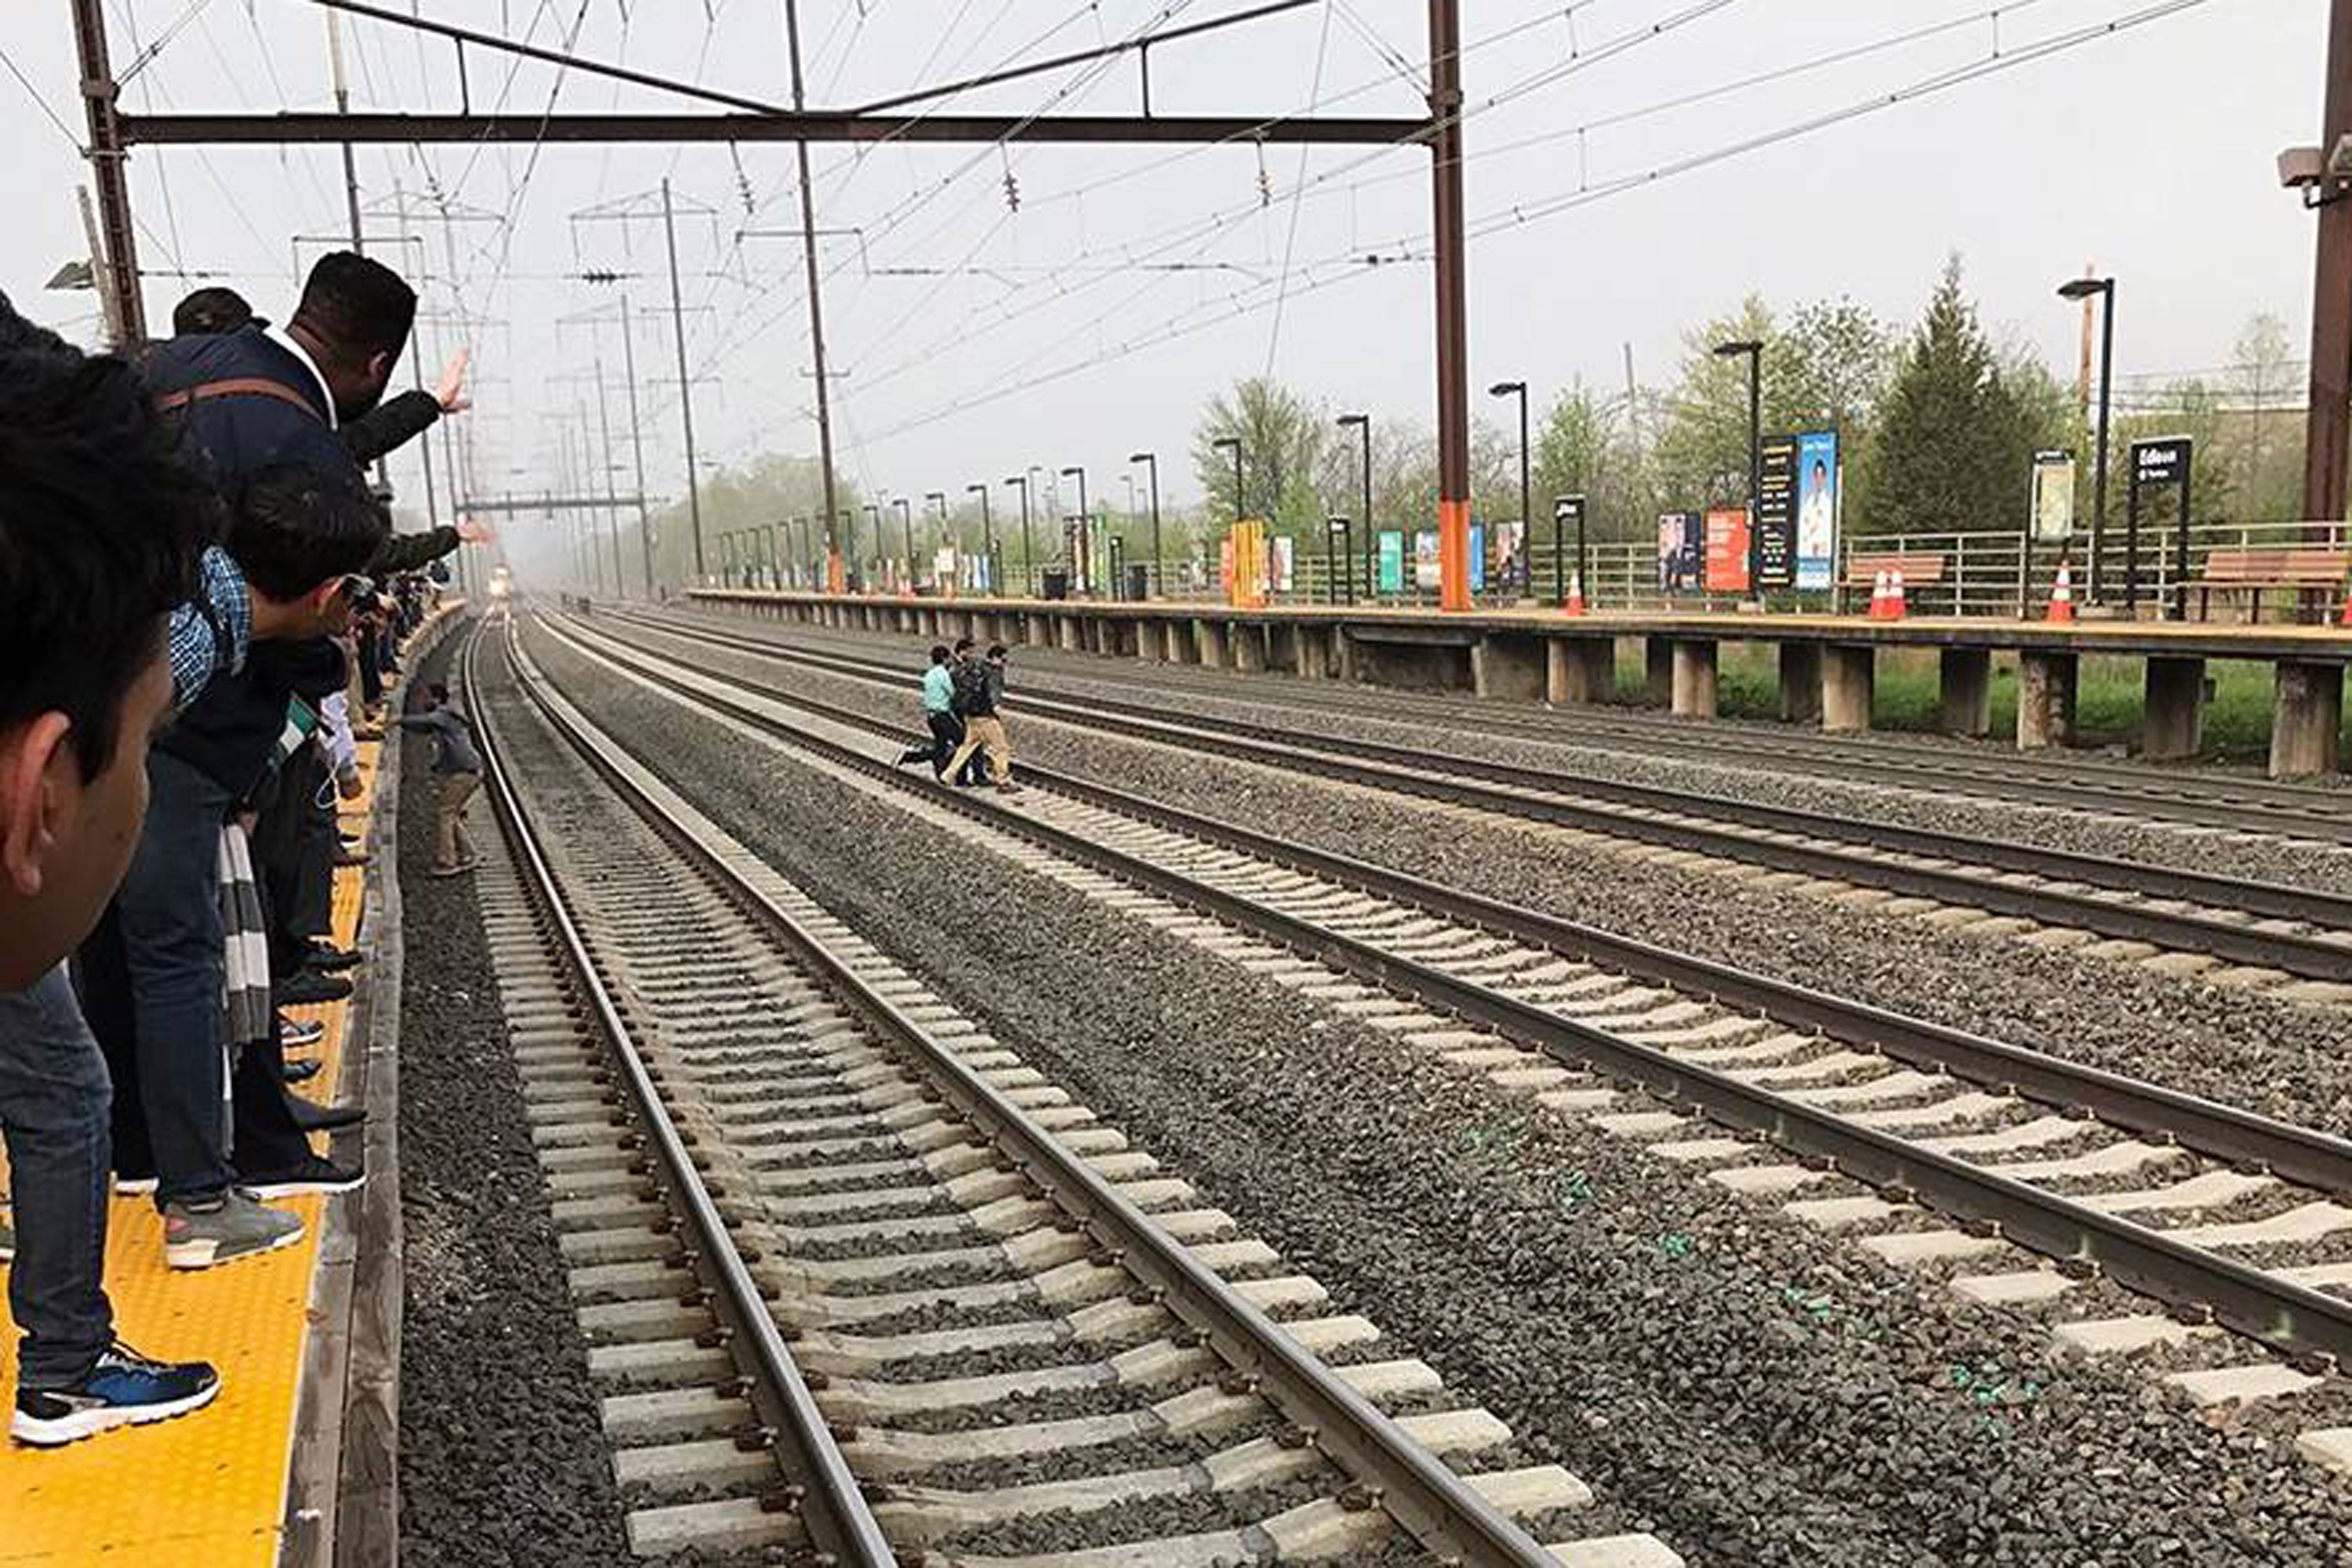 Jerk steals backpack from guy saving woman on train tracks